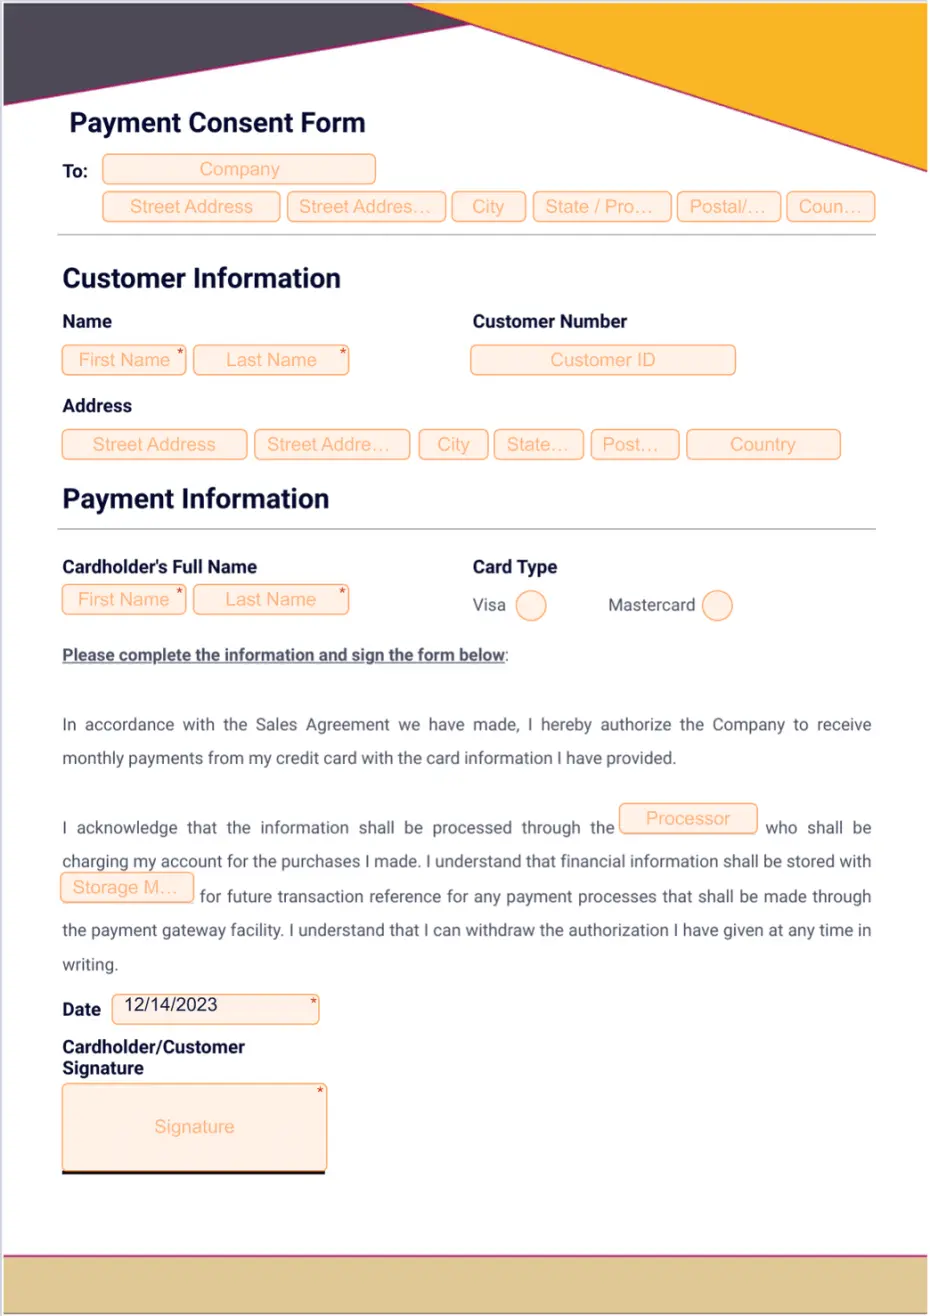 Payment Consent Form